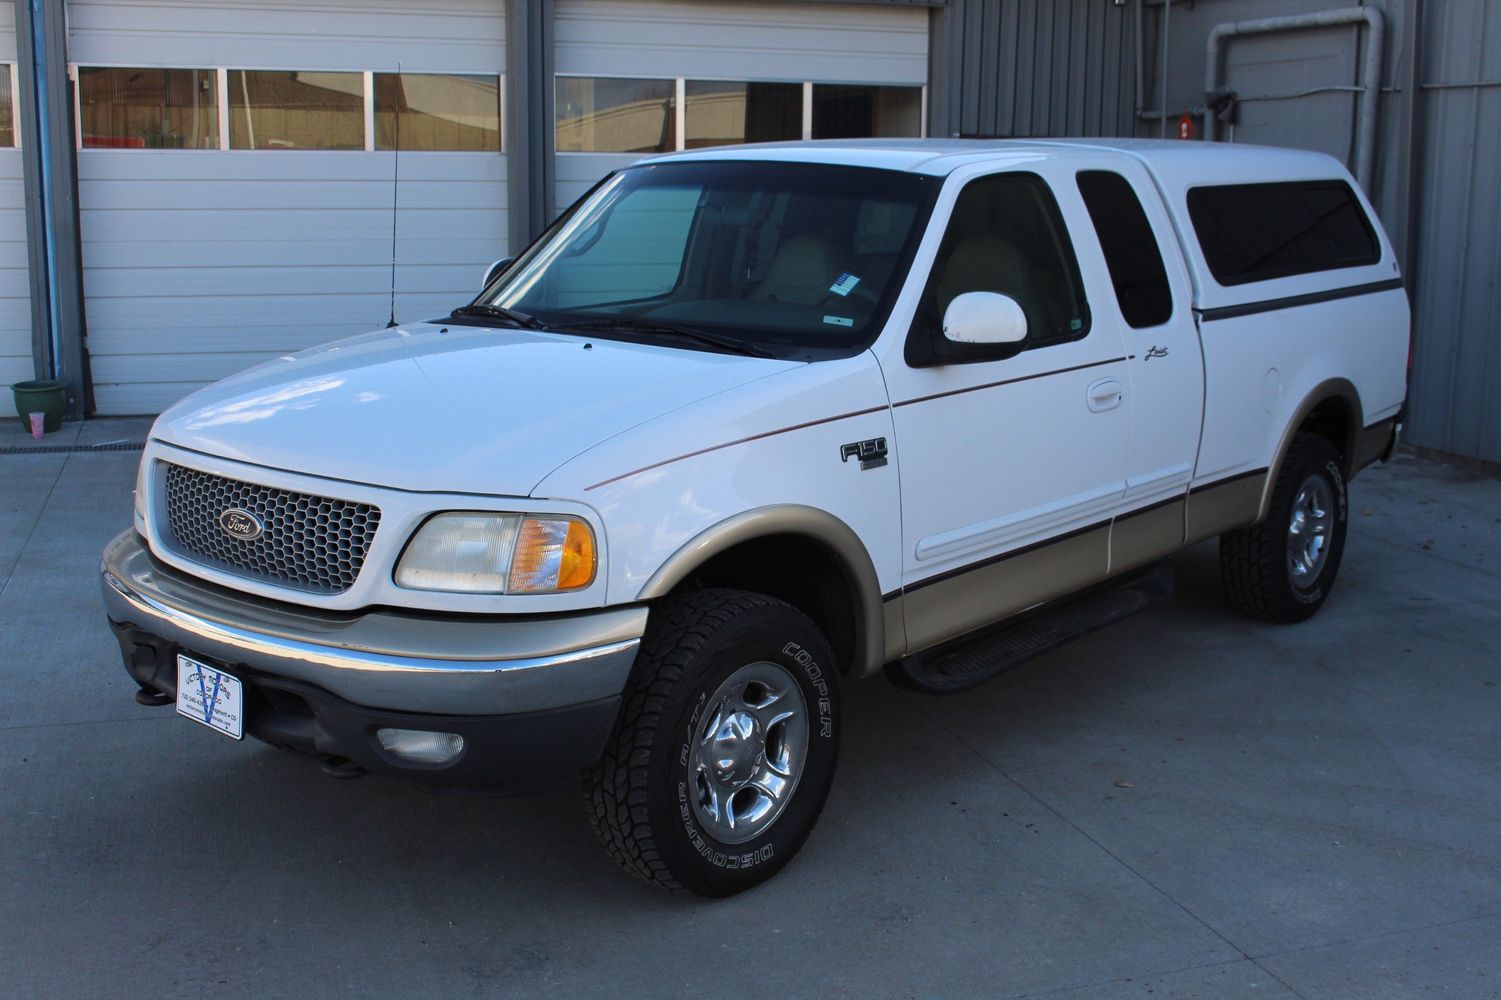 1999 Ford F-150 Lariat | Victory Motors of Colorado 1999 Ford F150 4.6 Towing Capacity